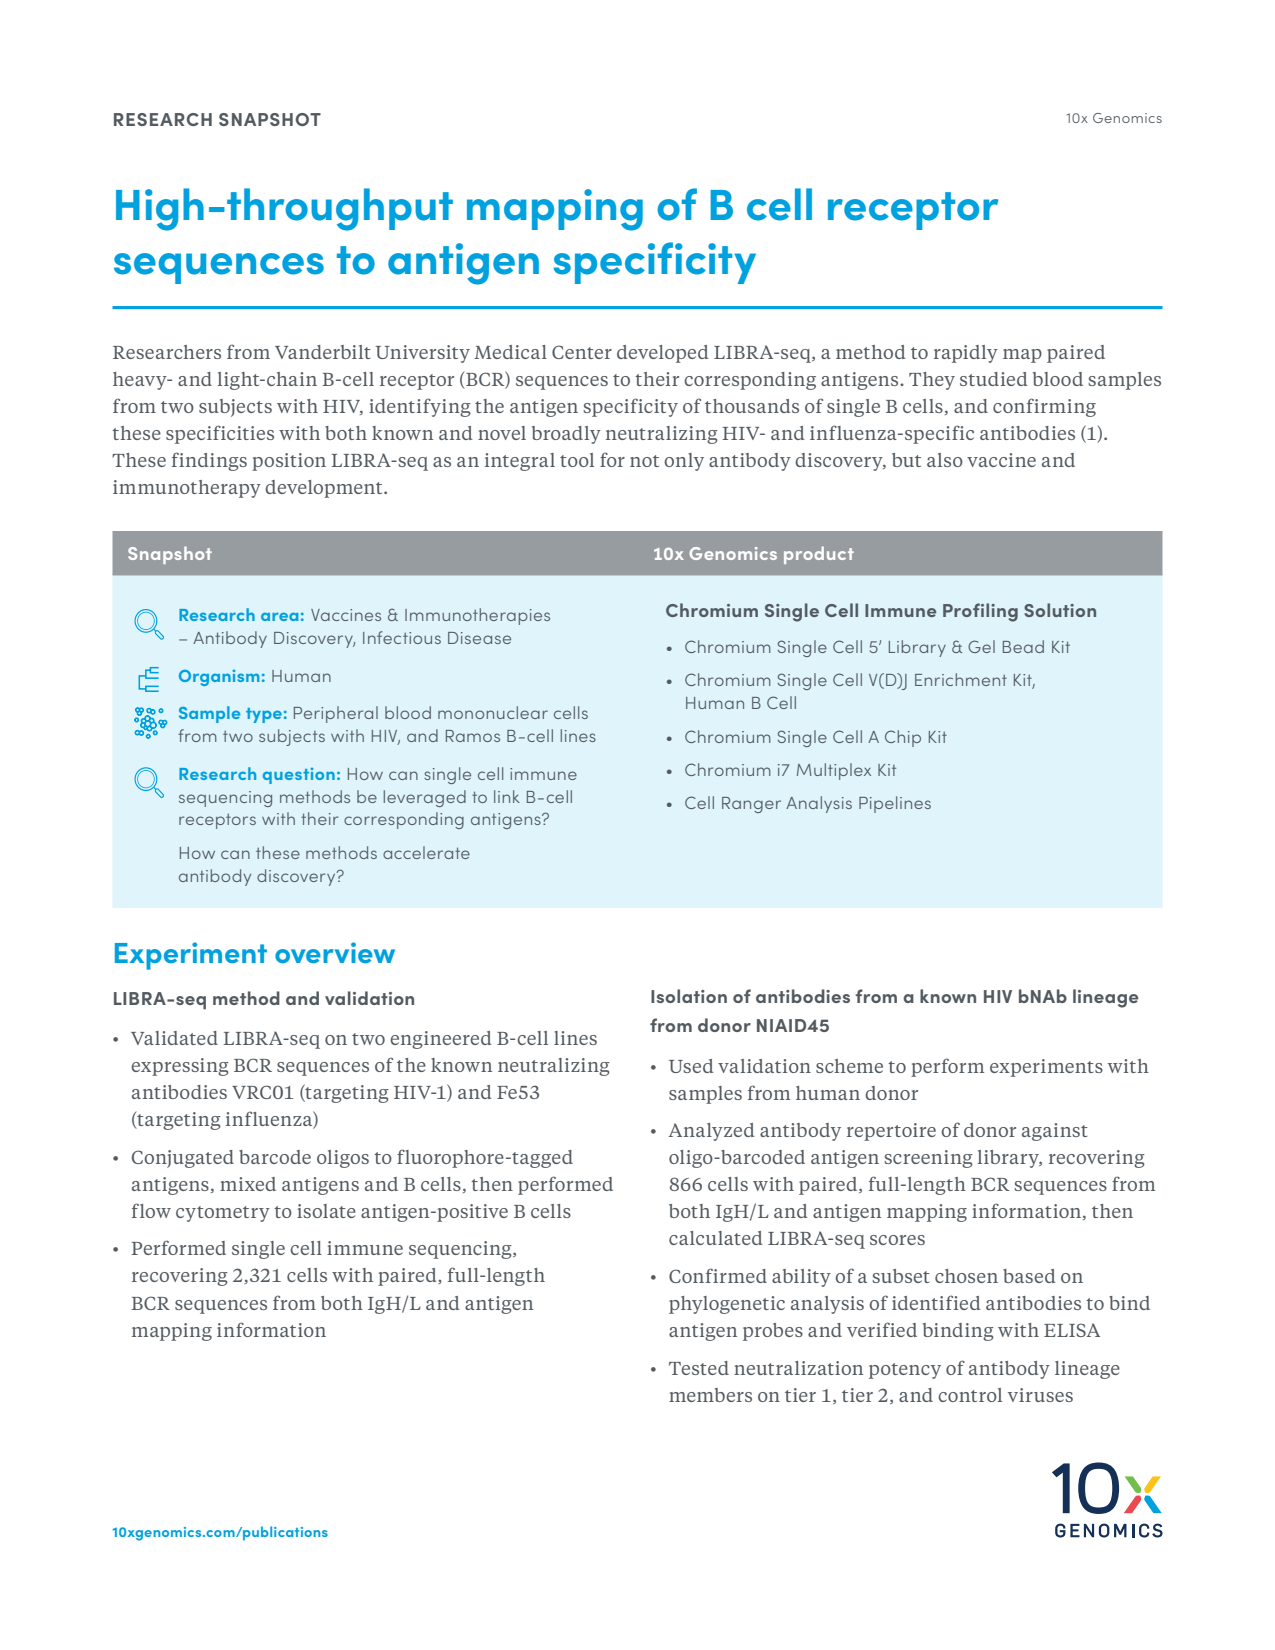 High-throughput mapping of B cell receptor sequences to antigen specificity